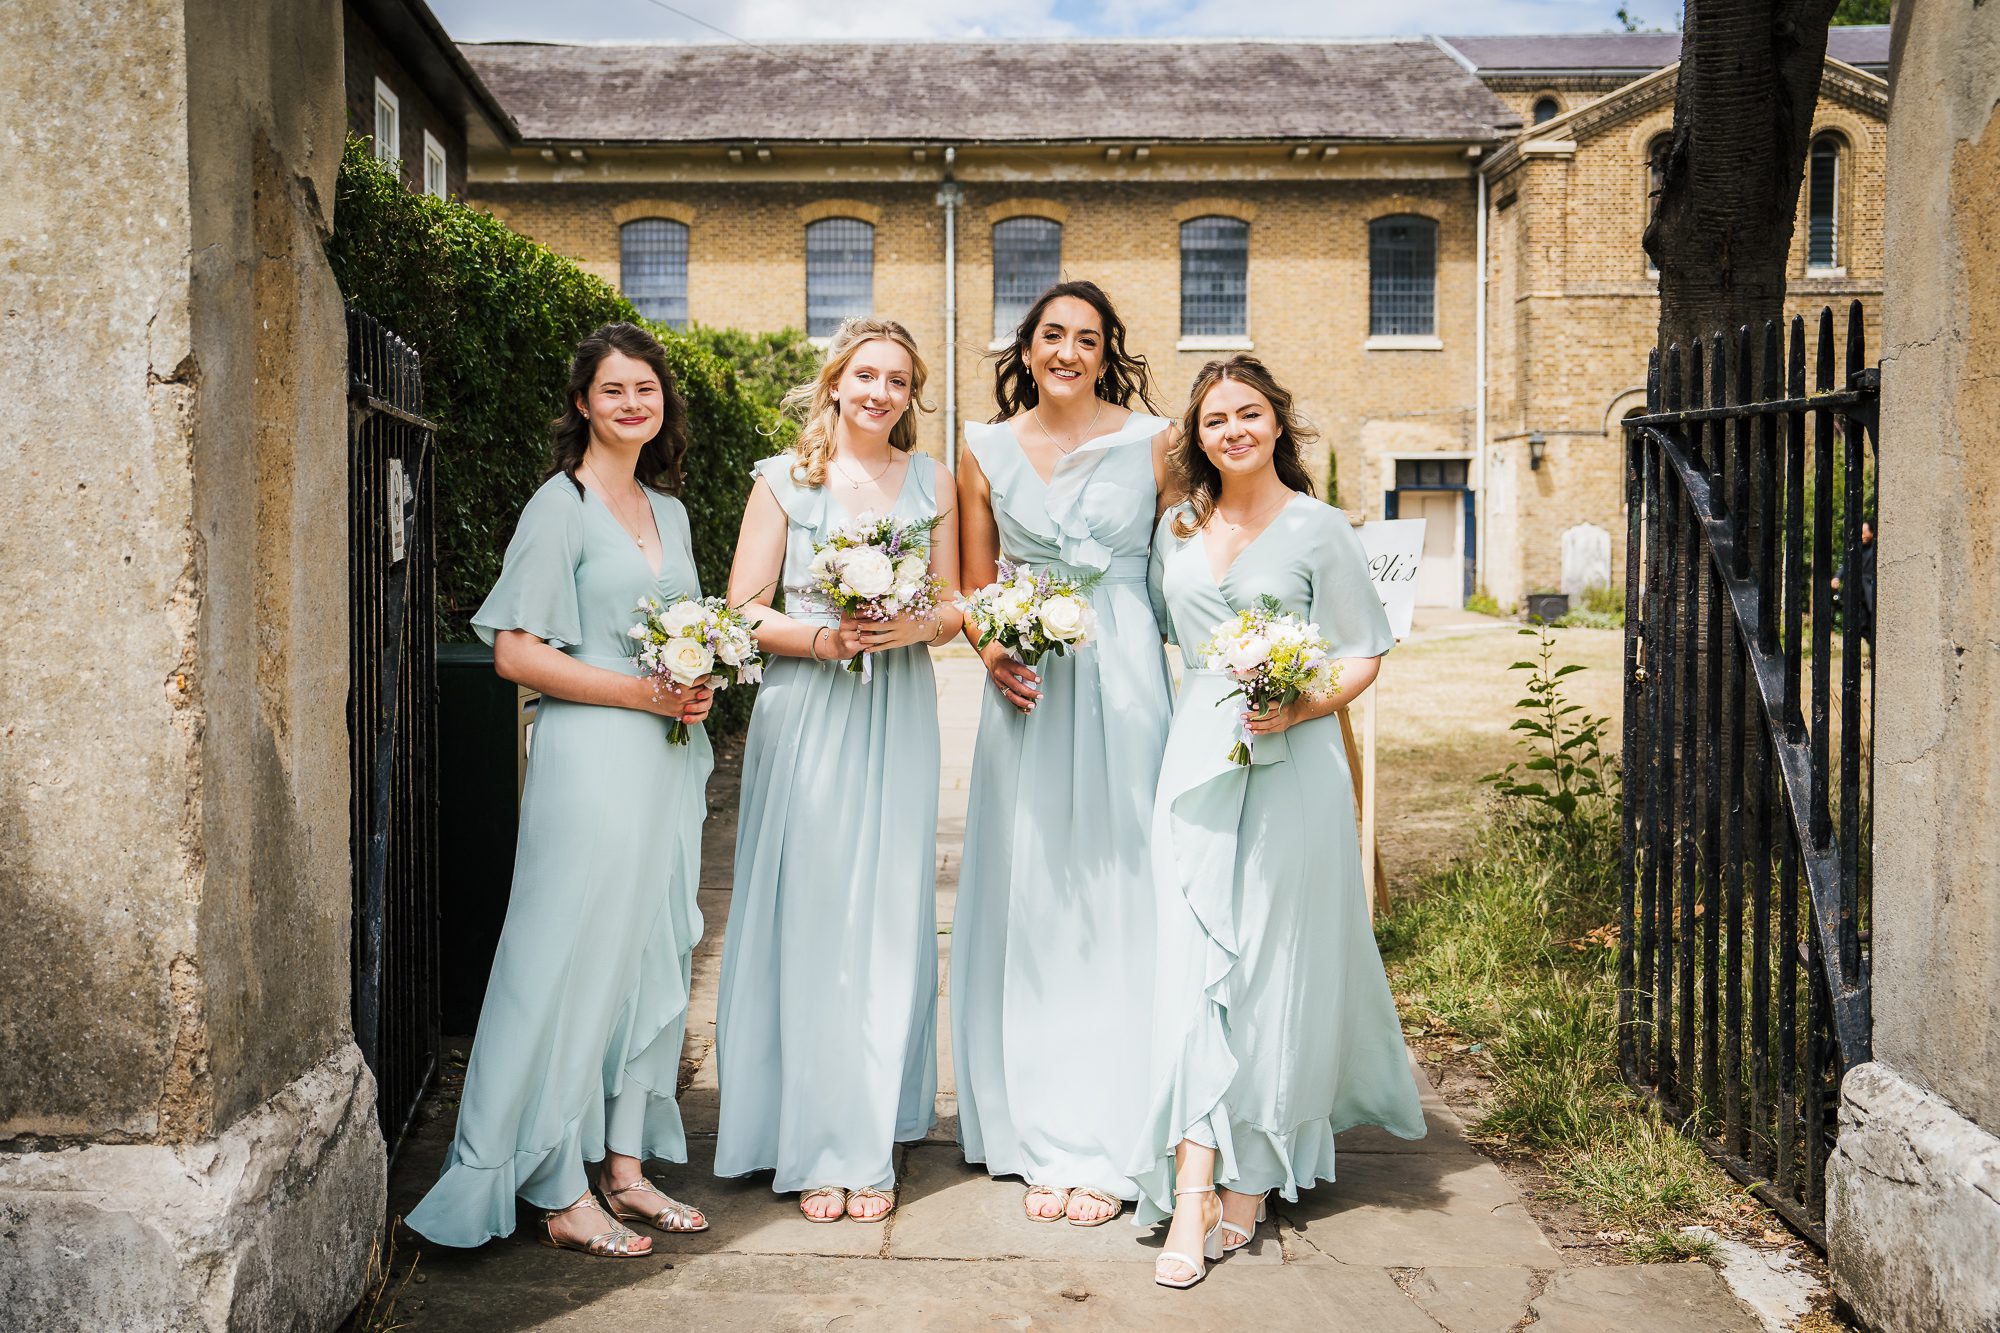 Maids to Measure bridesmaids for a London summer wedding.